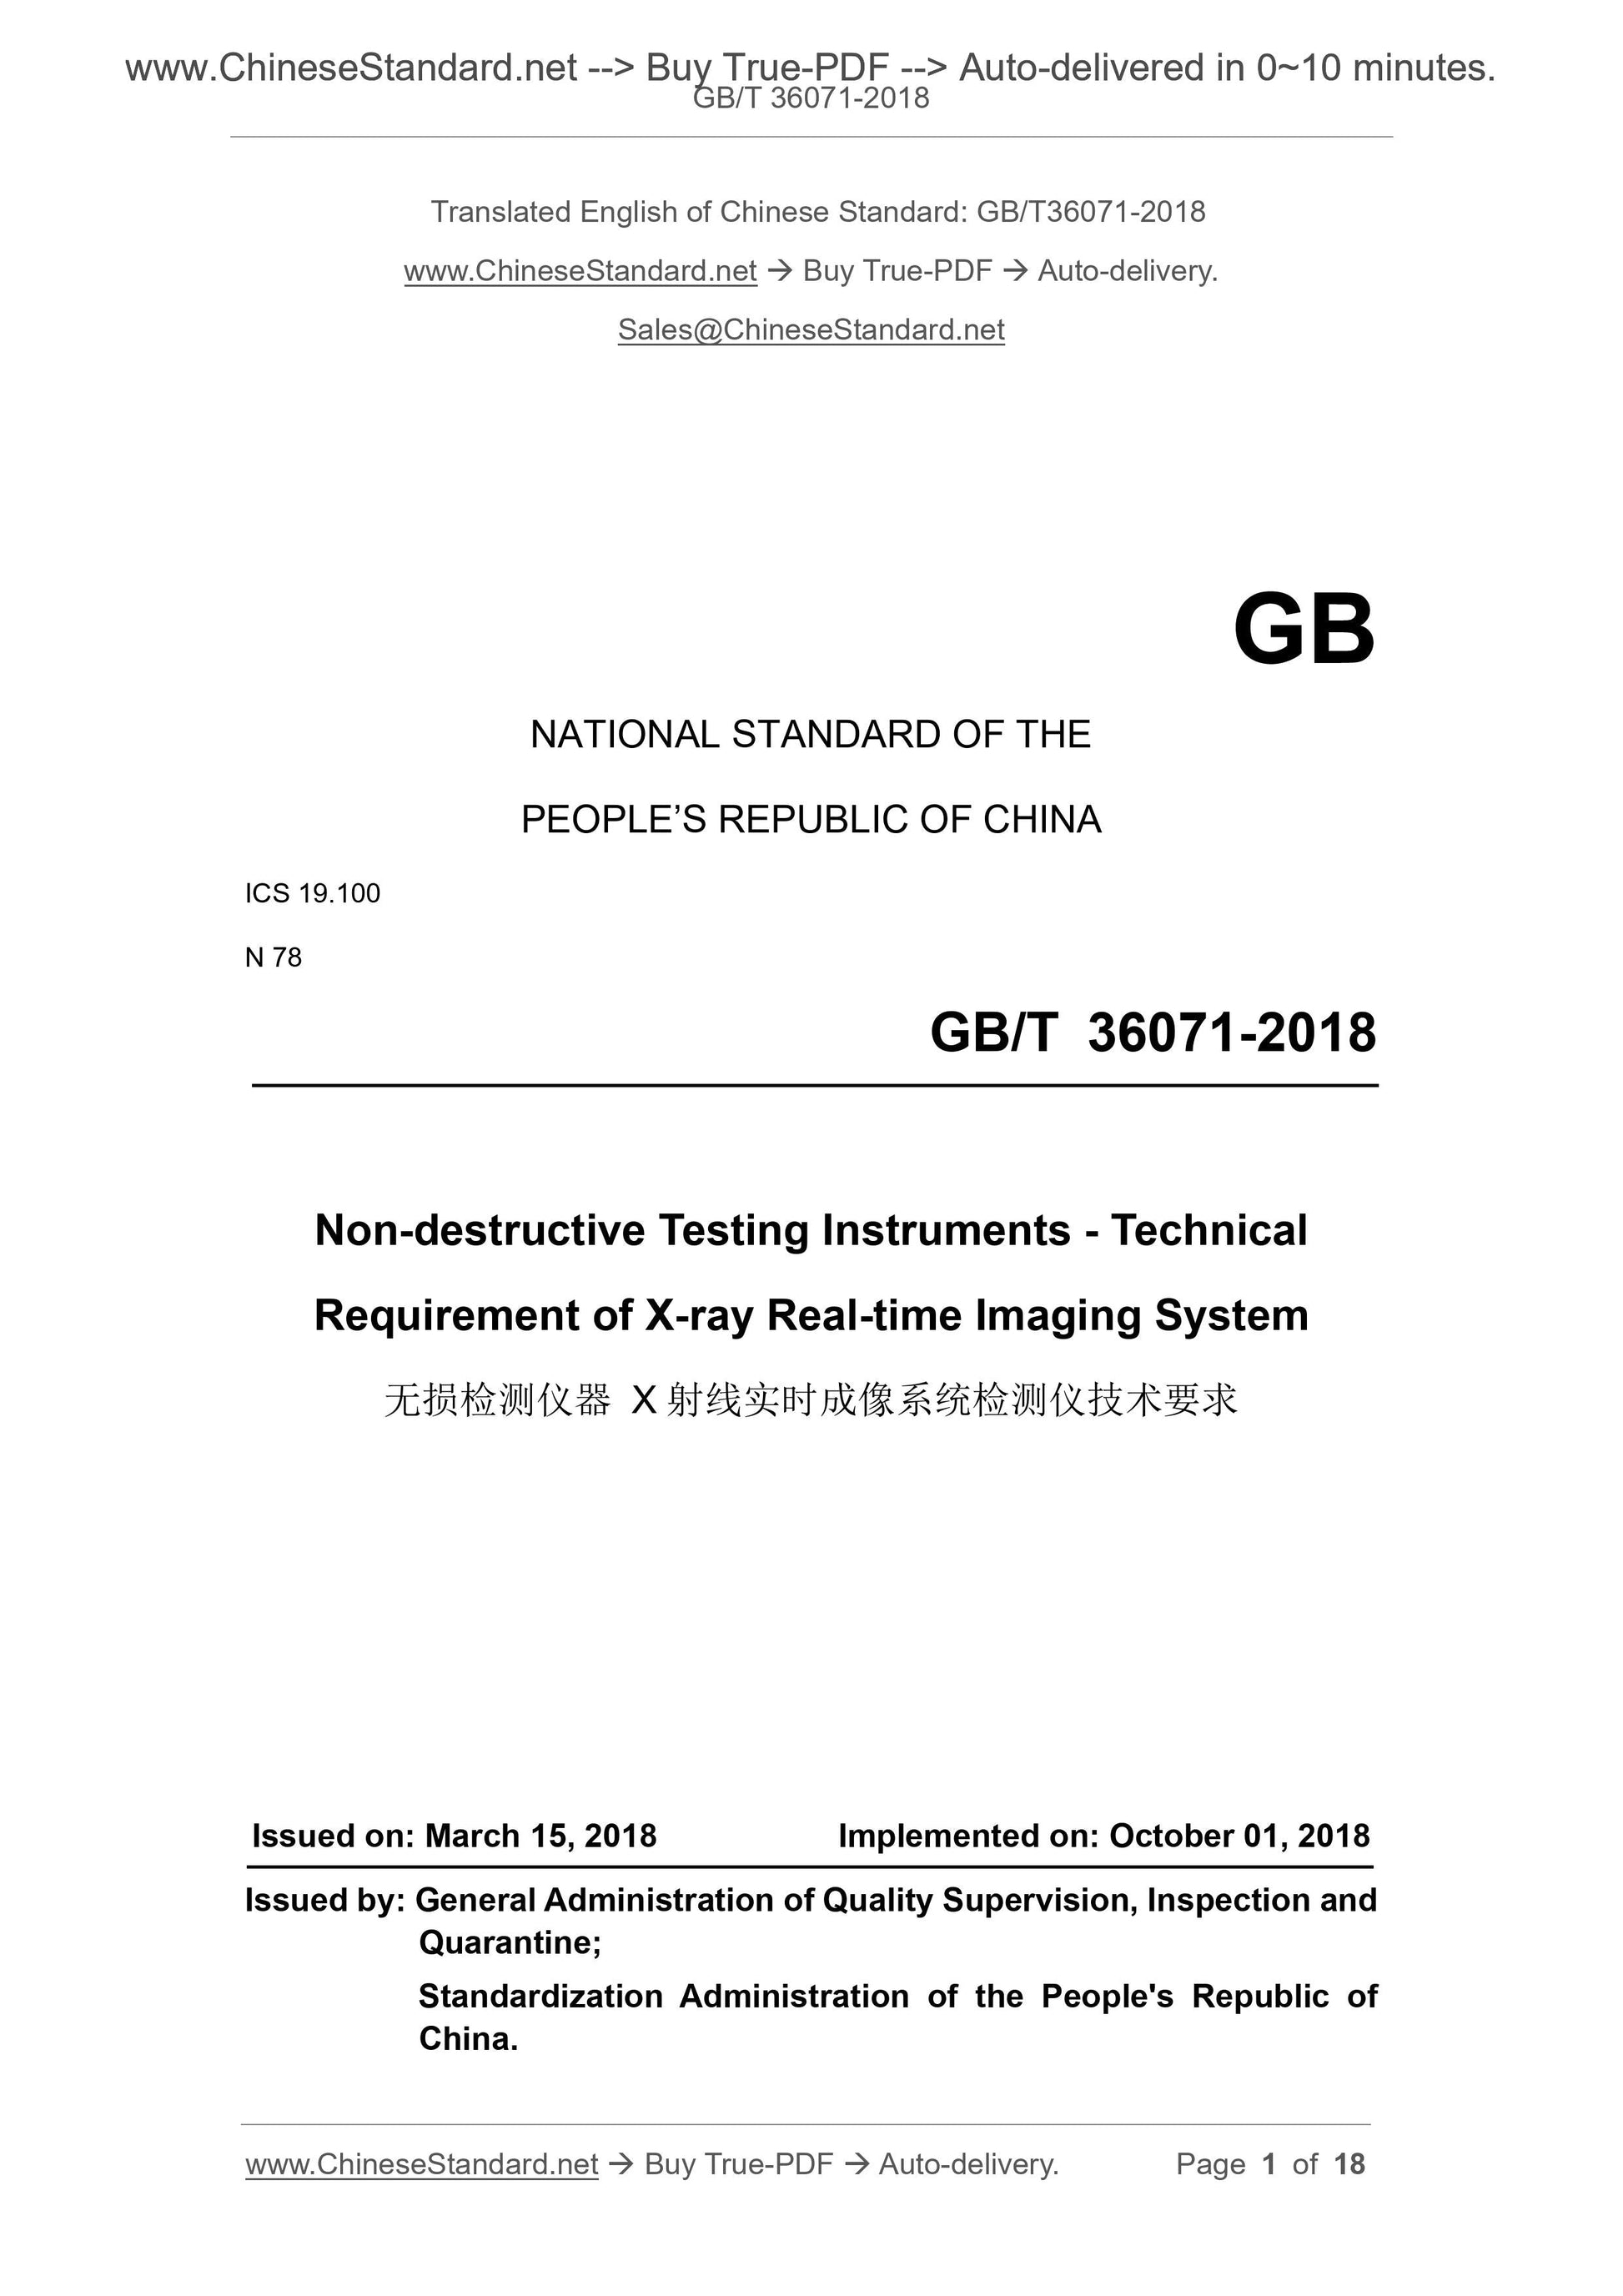 GB/T 36071-2018 Page 1